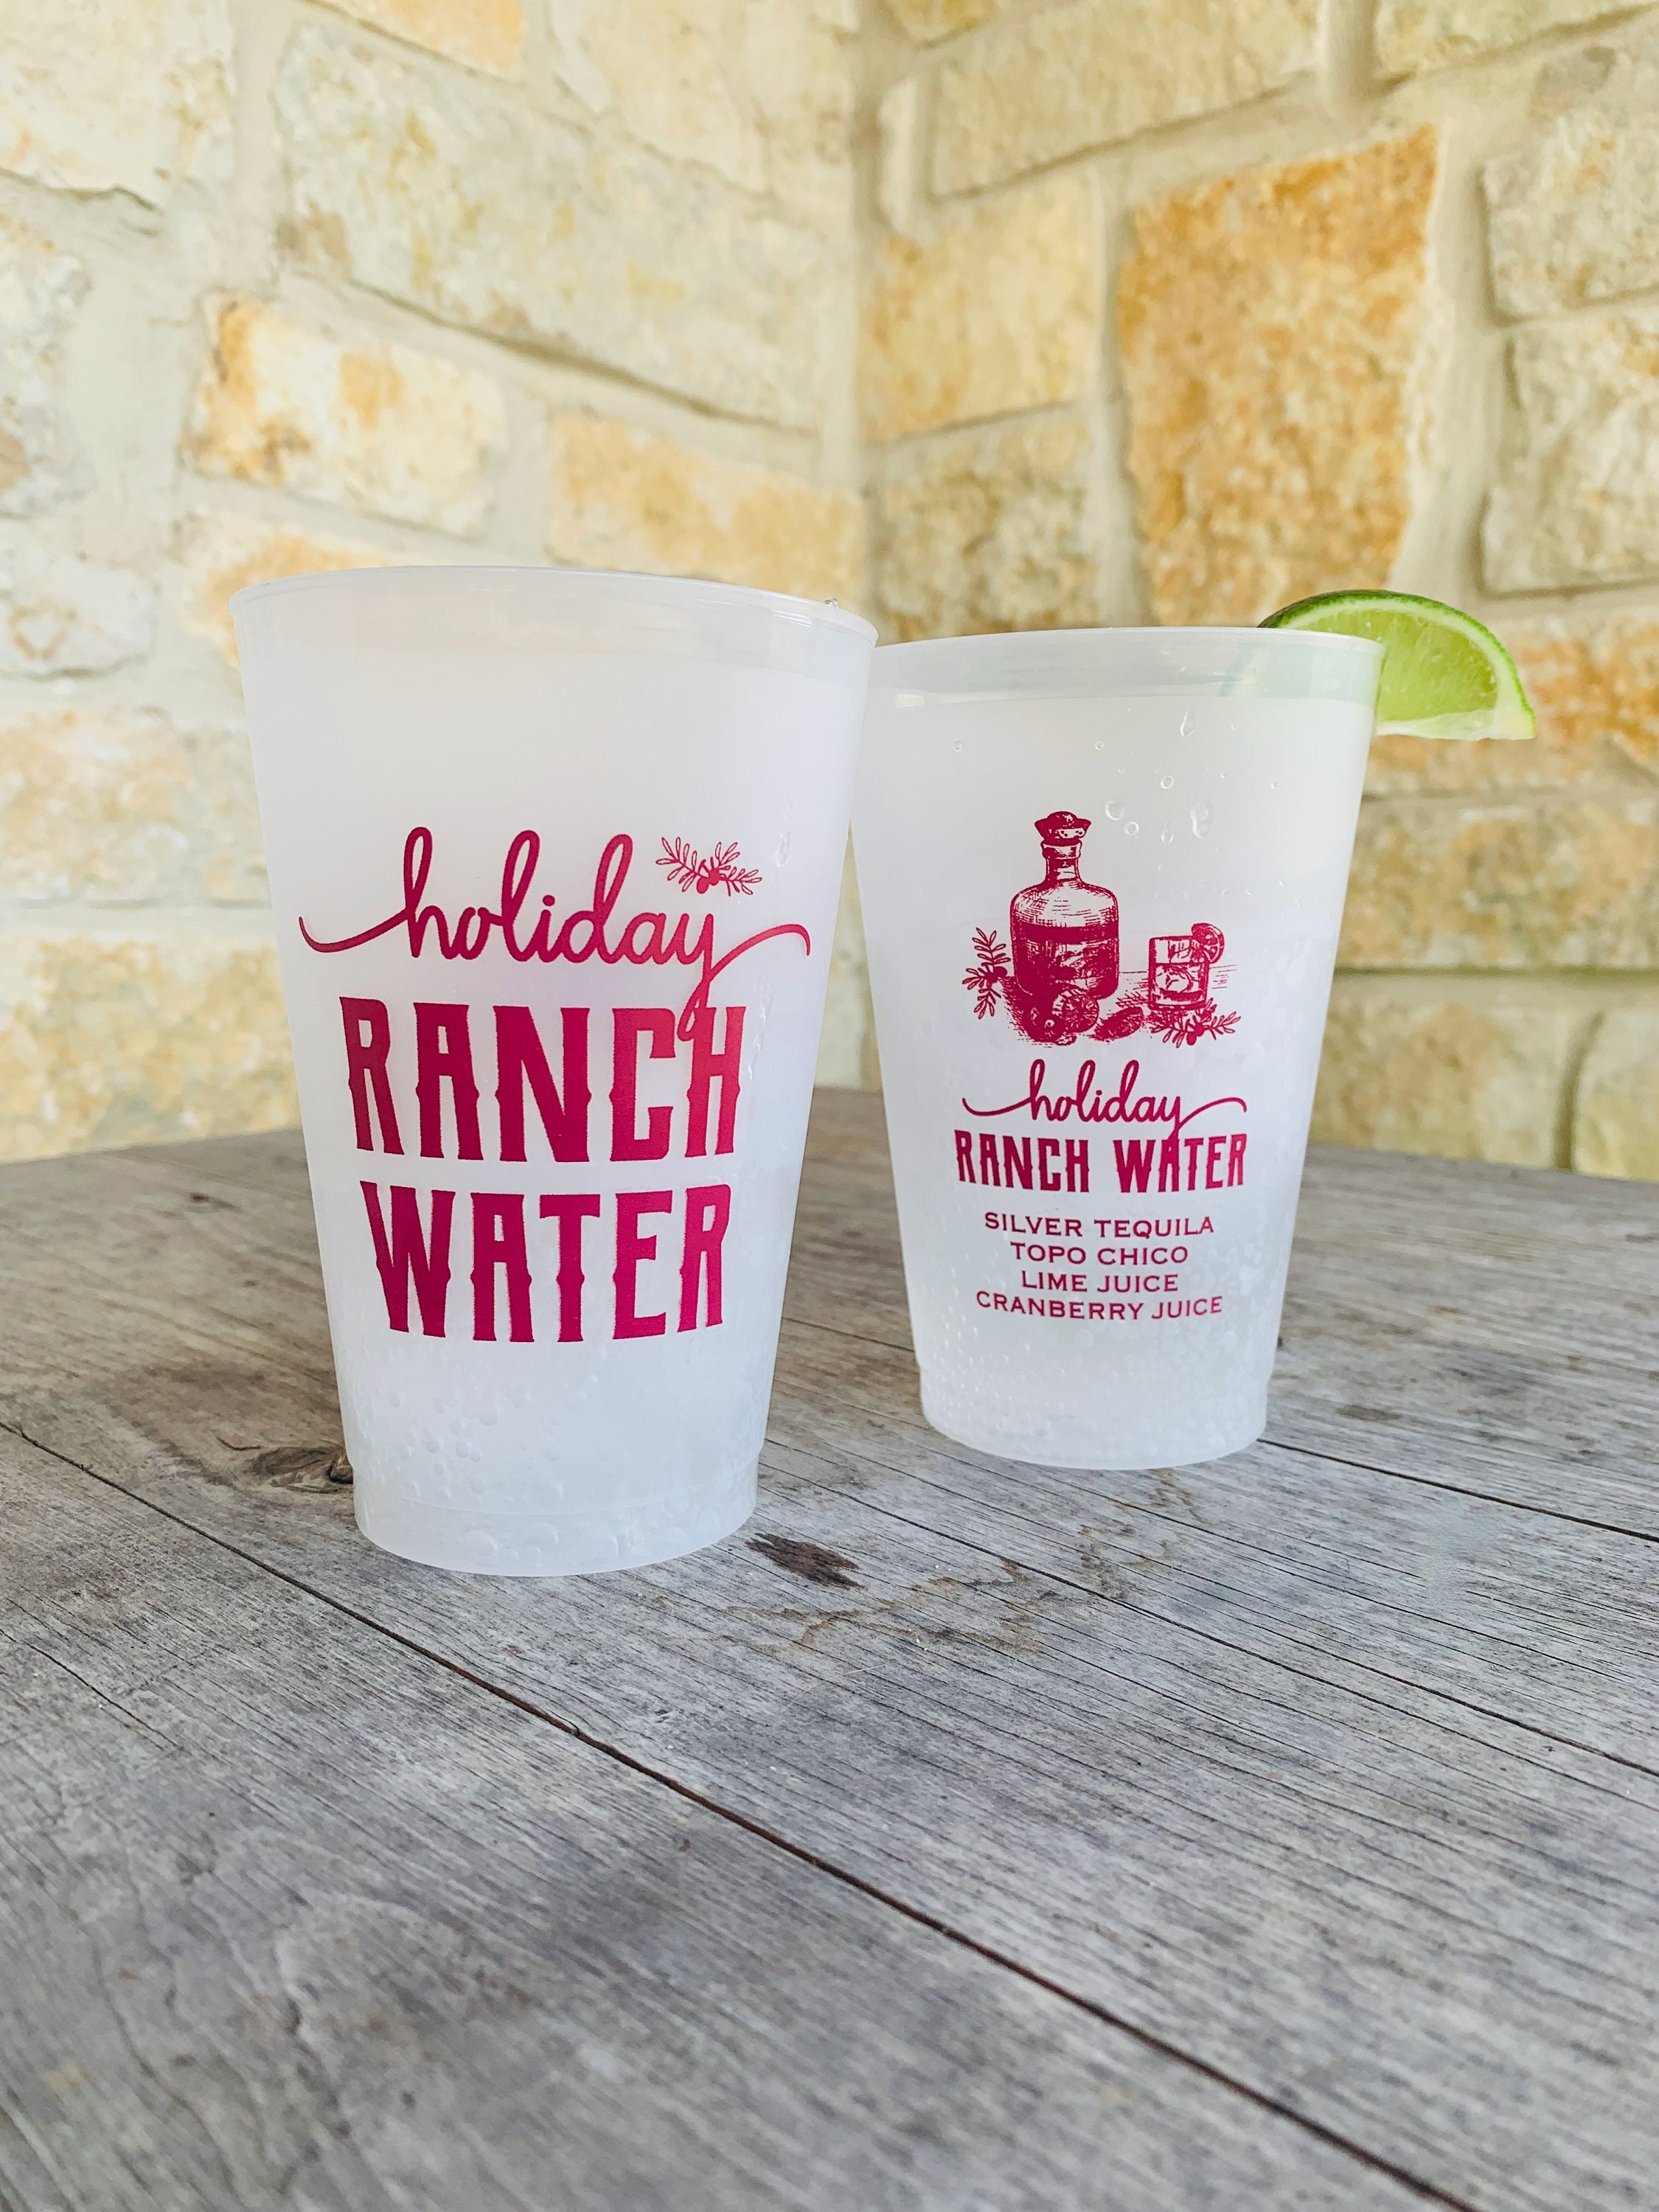 Foam Cups - Ranch Water - Tequila Water Topo Chico